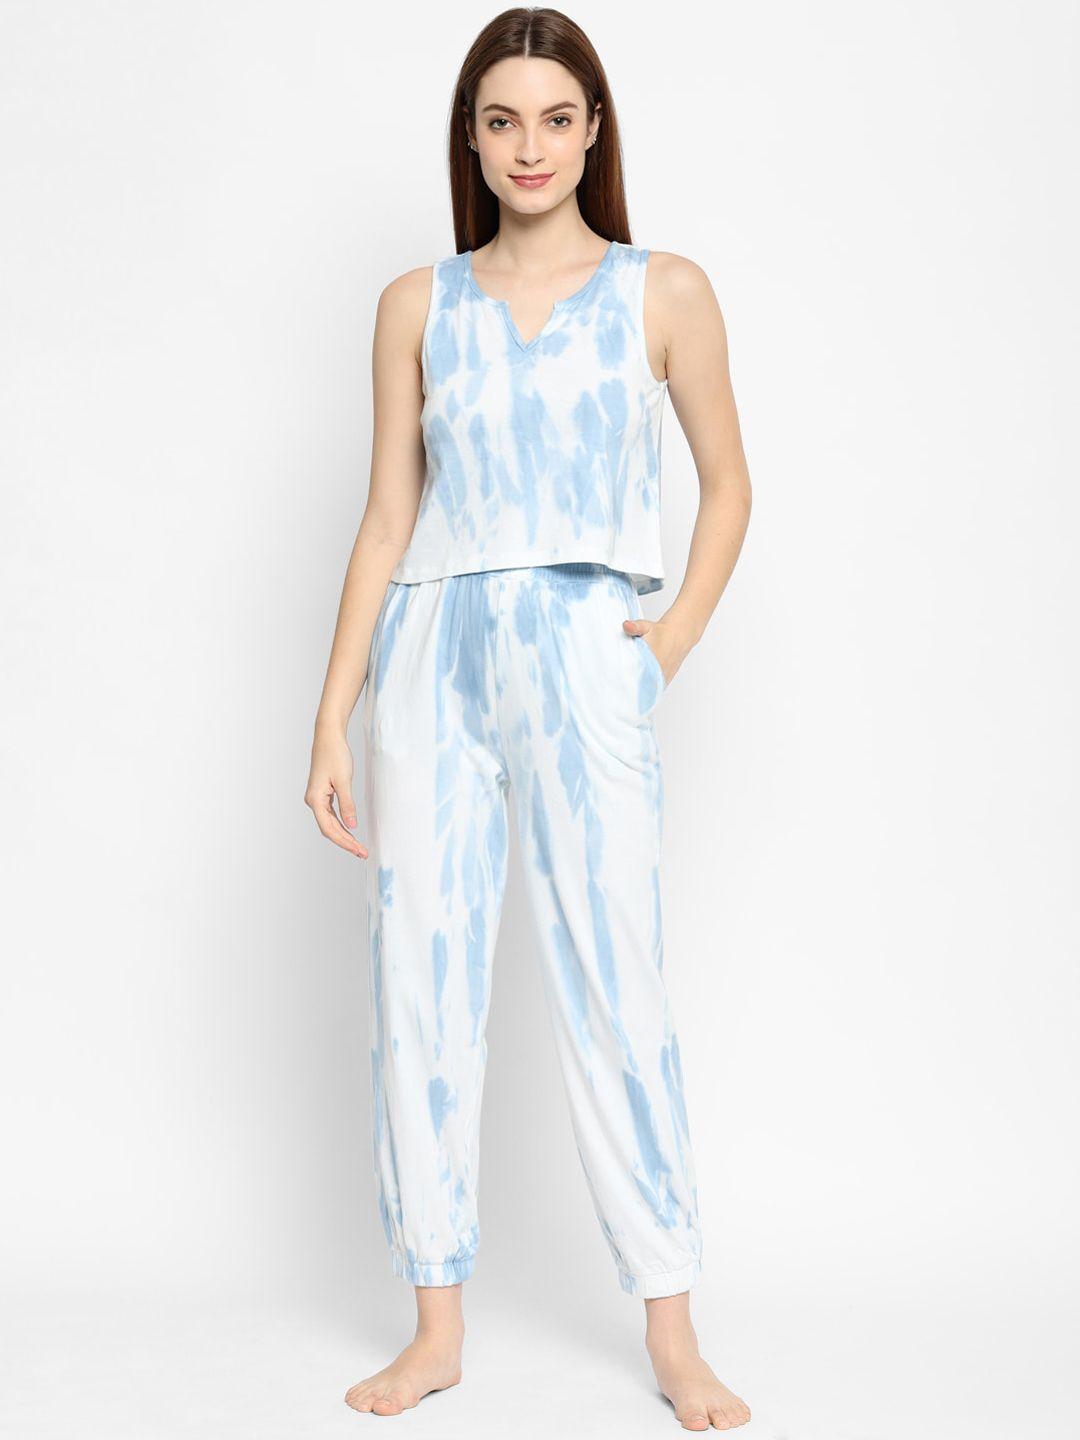 house of kkarma women blue & white tie and dye printed night suit